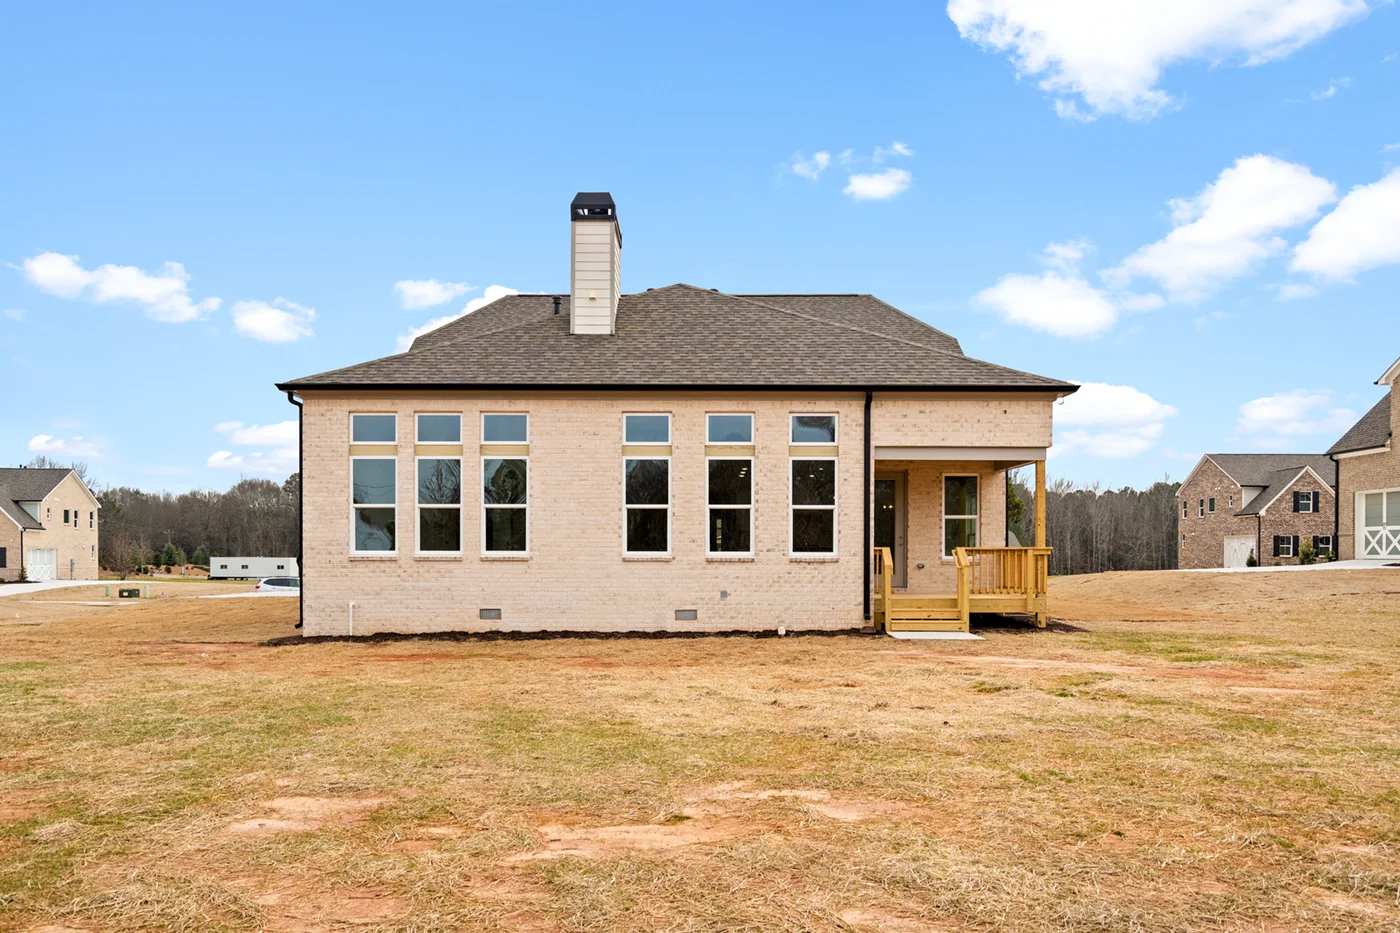 1300 Stonewood Field Rd. Watkinsville, GA | Stonewood Community | Single-Family Home for Sale by SR Homes | Stonewood Community | Single-Family Home for Sale by SR Homes